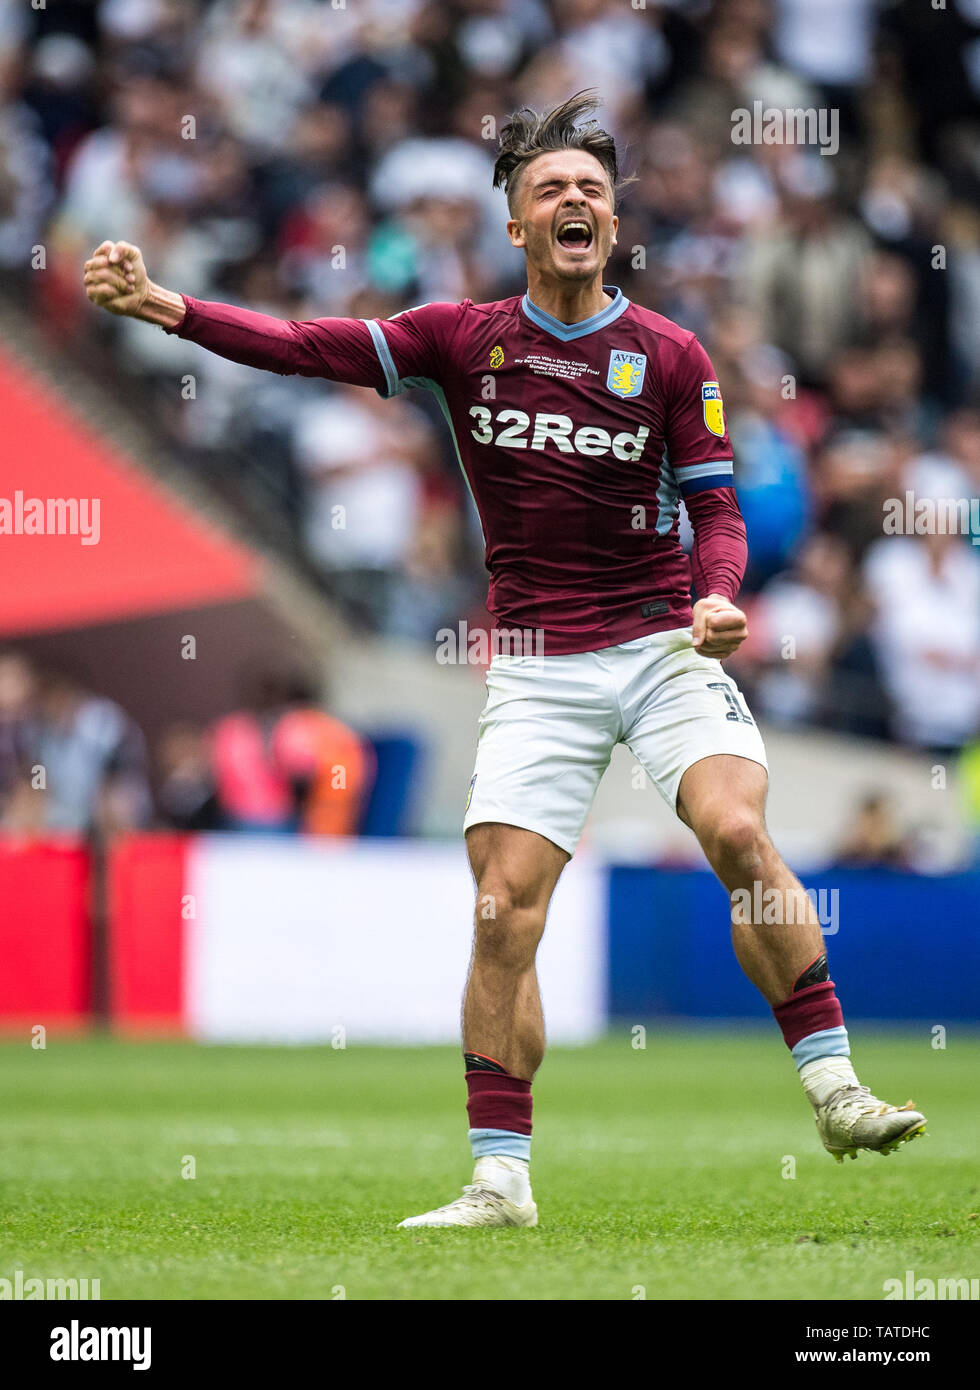 LONDON, ENGLAND - MAY 27: Jack Grealish of Aston Villa celebrate during the Sky Bet Championship Play-off Final match between Aston Villa and Derby County at Wembley Stadium on May 27, 2019 in London, United Kingdom. (Photo by Sebastian Frej/MB Media) Stock Photo